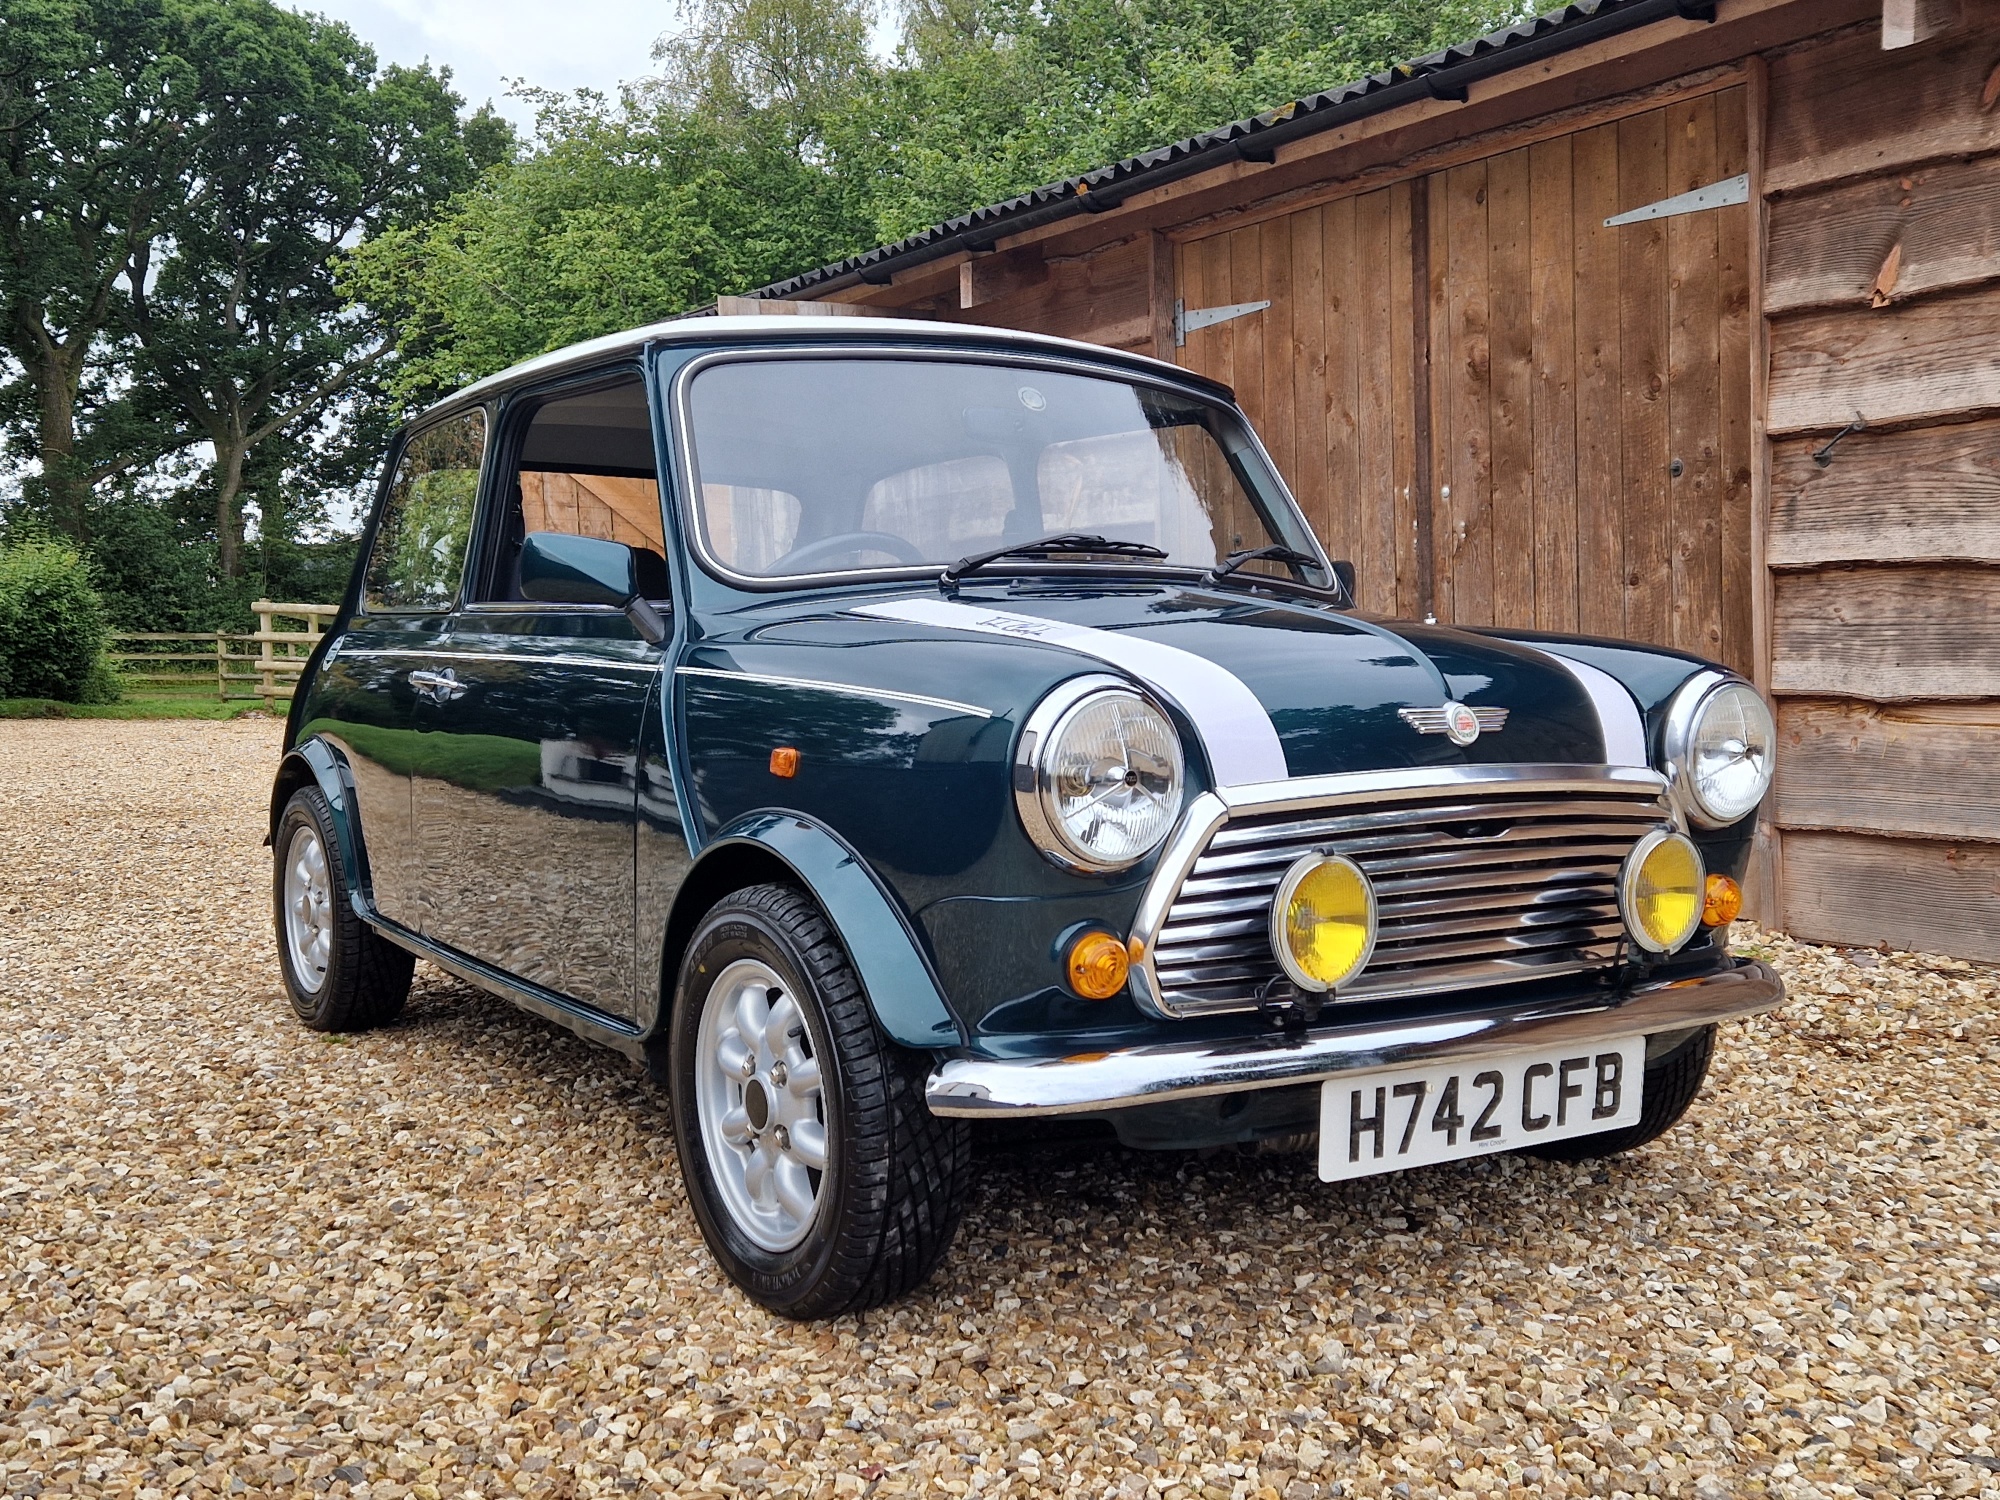 ** NOW SOLD ** Outstanding 1991 Mini Cooper Carburettor Model On Just 6500 Miles From New!